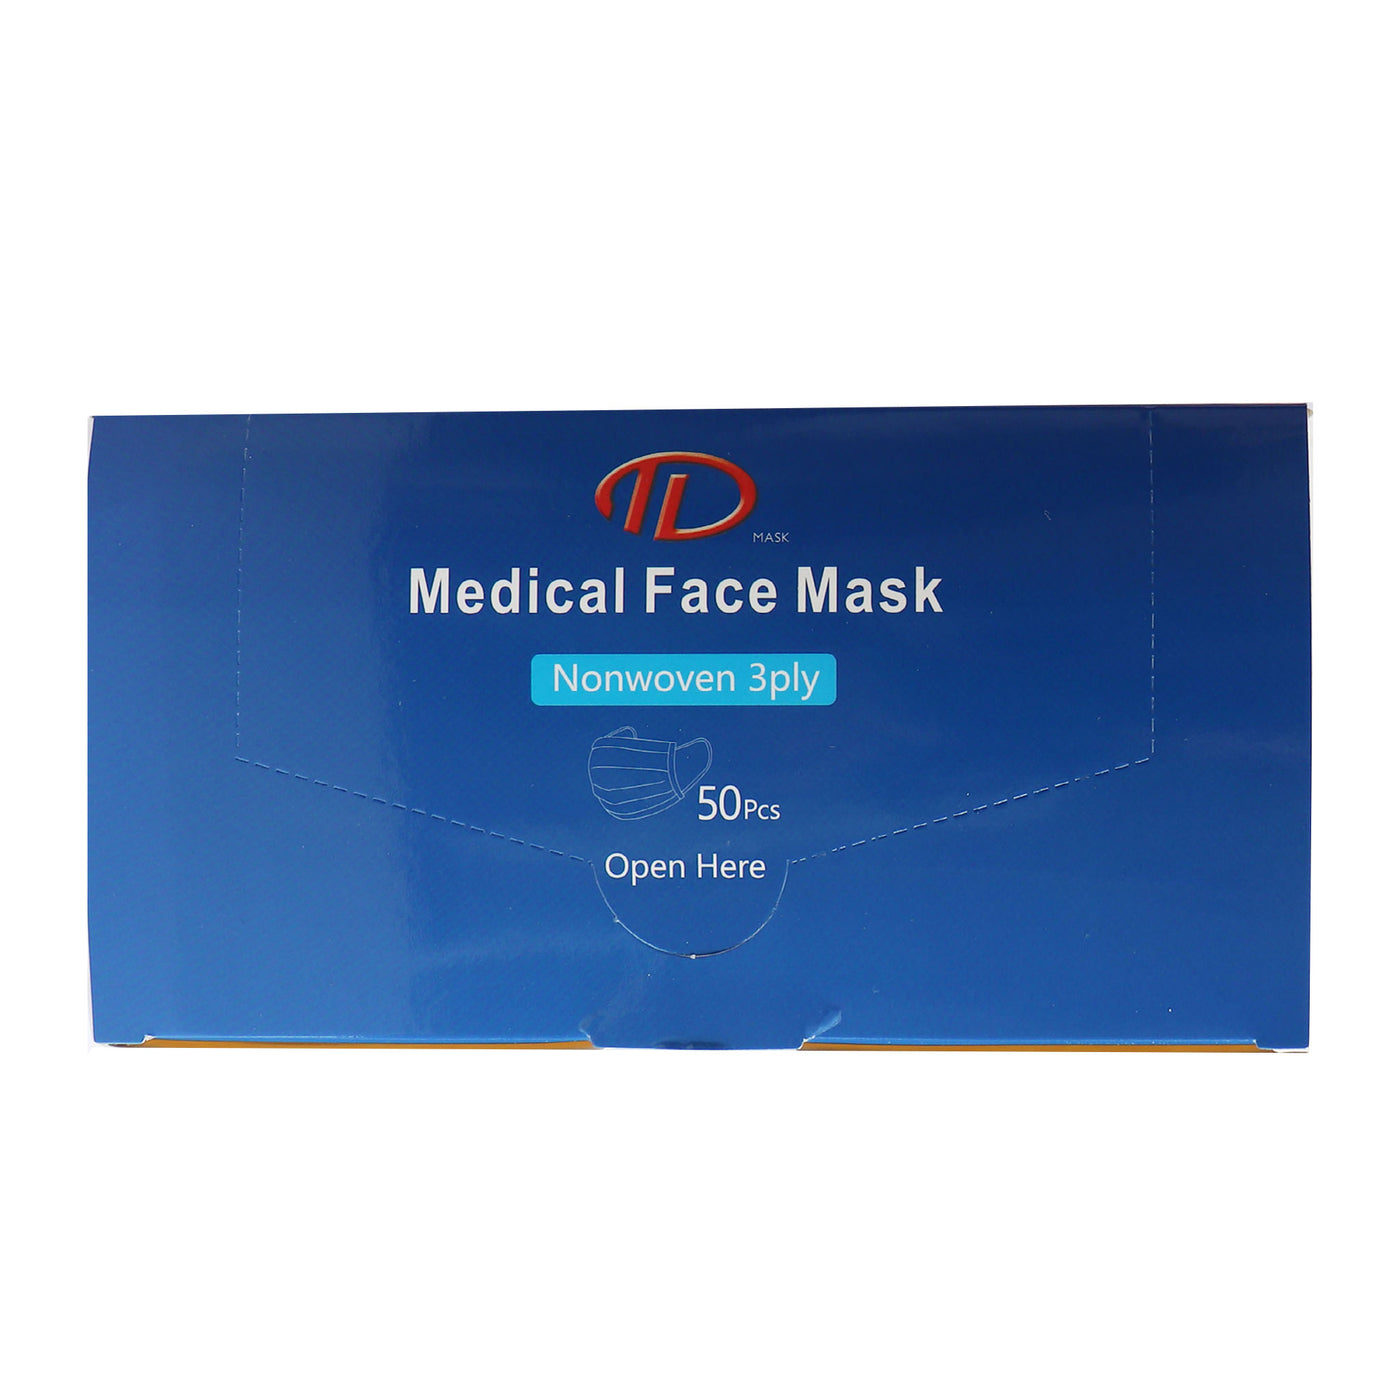 Medical Face Masks - ARTG 340395 - Universal Fit 3Ply Disposable 50 Pack